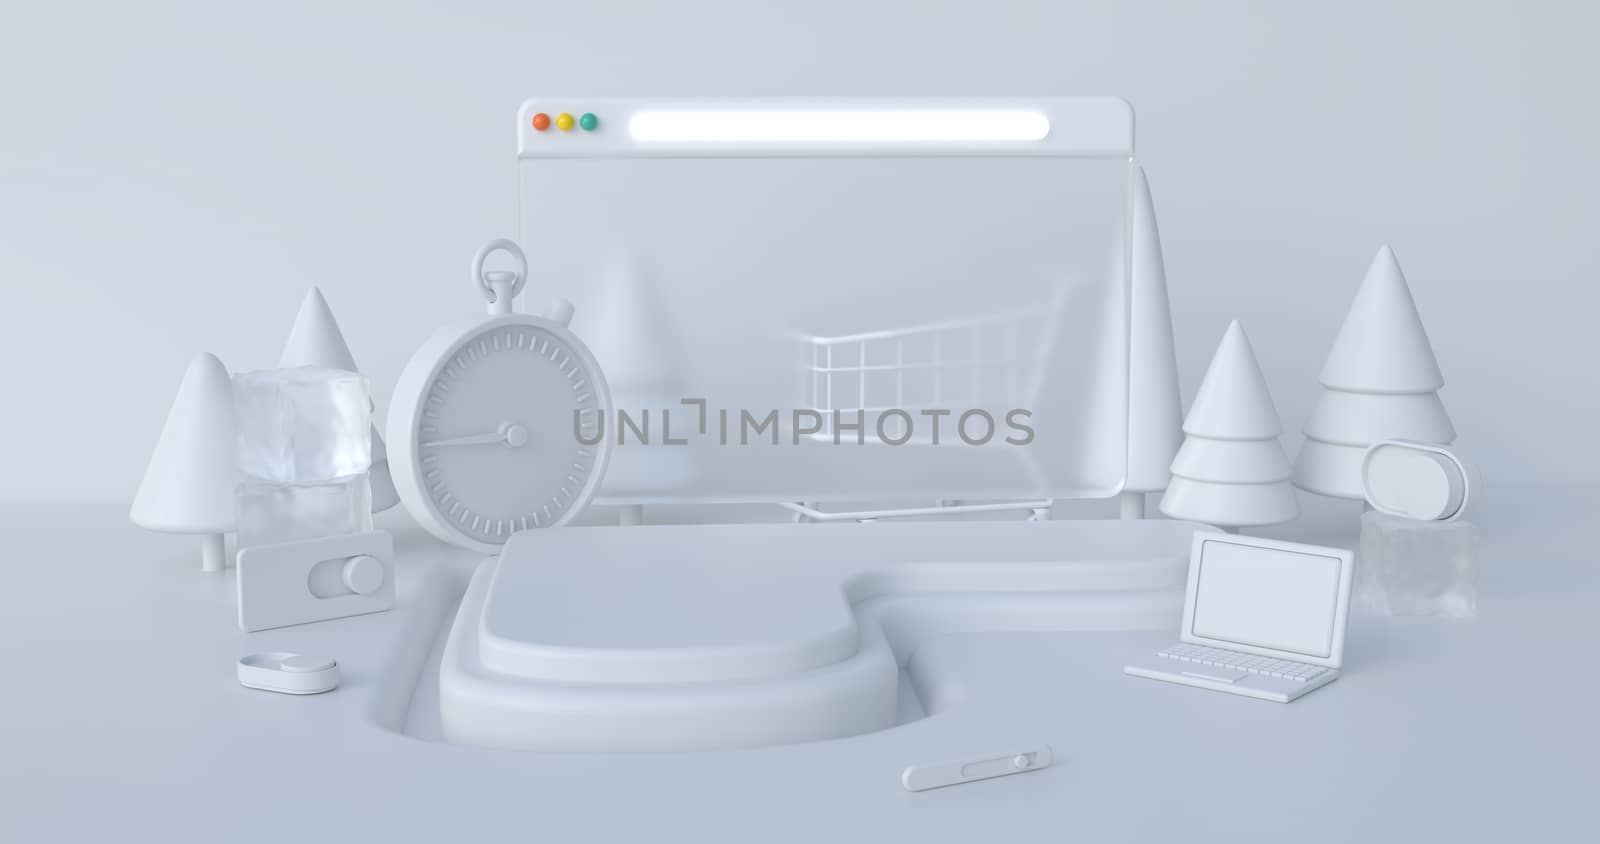 3d rendering of white podium and website icon.